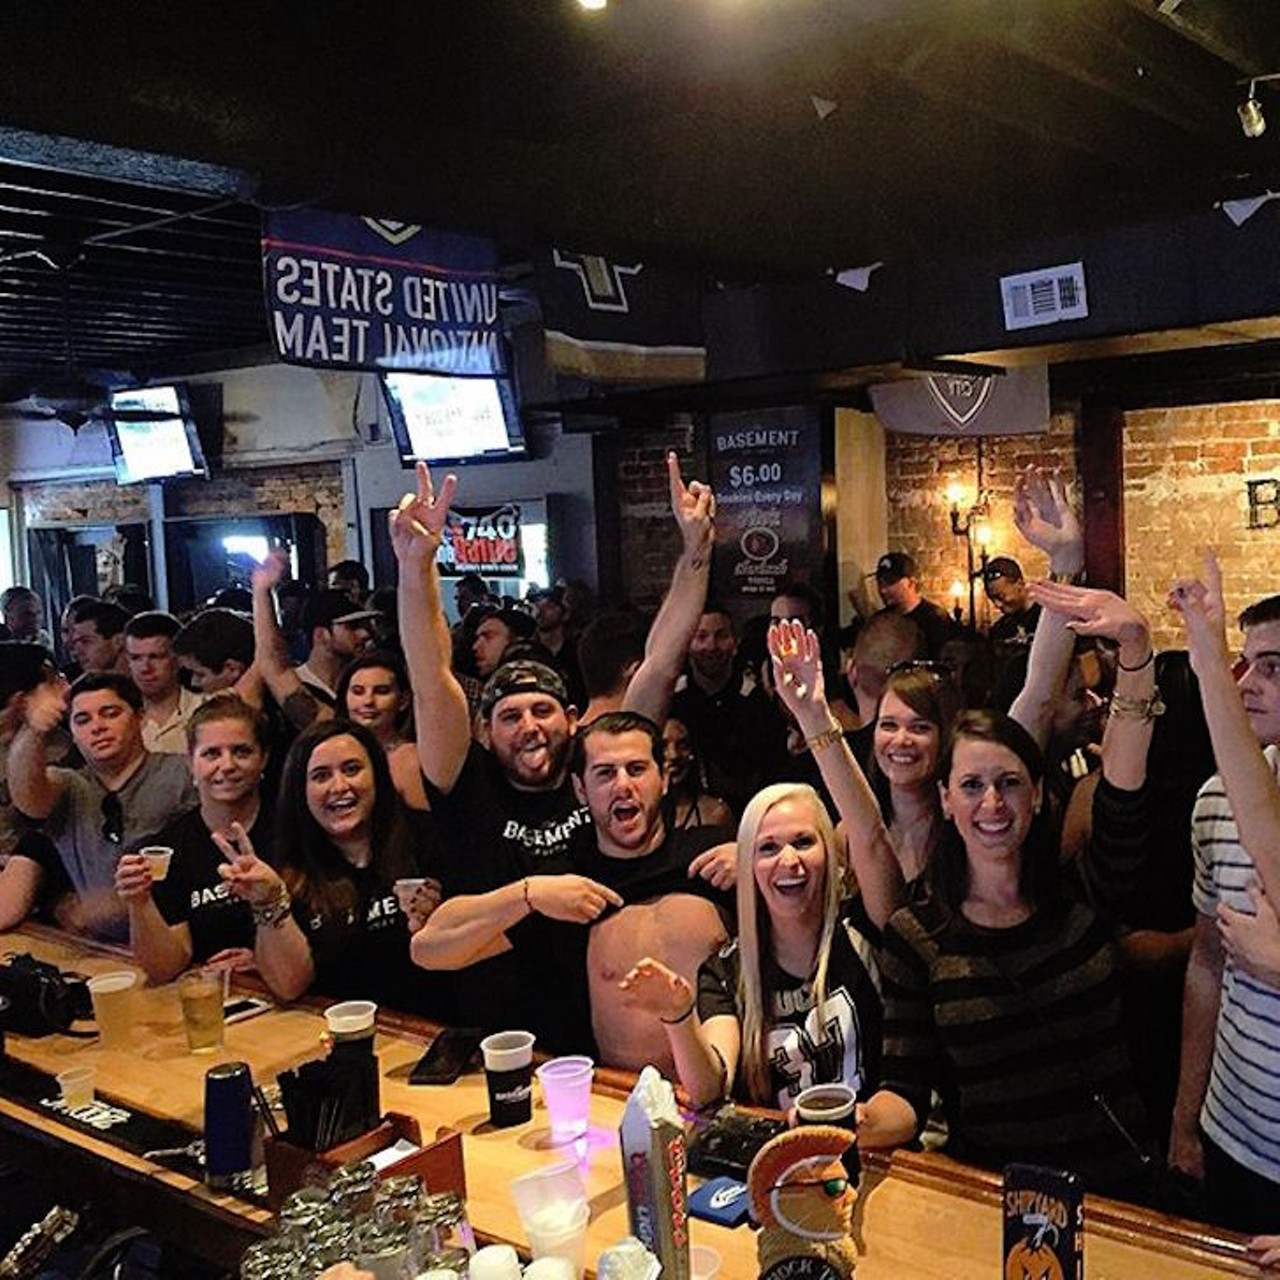 The Basement
68 E. Pine St., 407-250-4840
20 TVs
This bar gave away more than 15,000 free beers during last year&#146;s dismal UCF football season. While you might not get free drinks during the big game, at least you might actually get to see your team win. 
Photo via thebasementorlando/Instagram